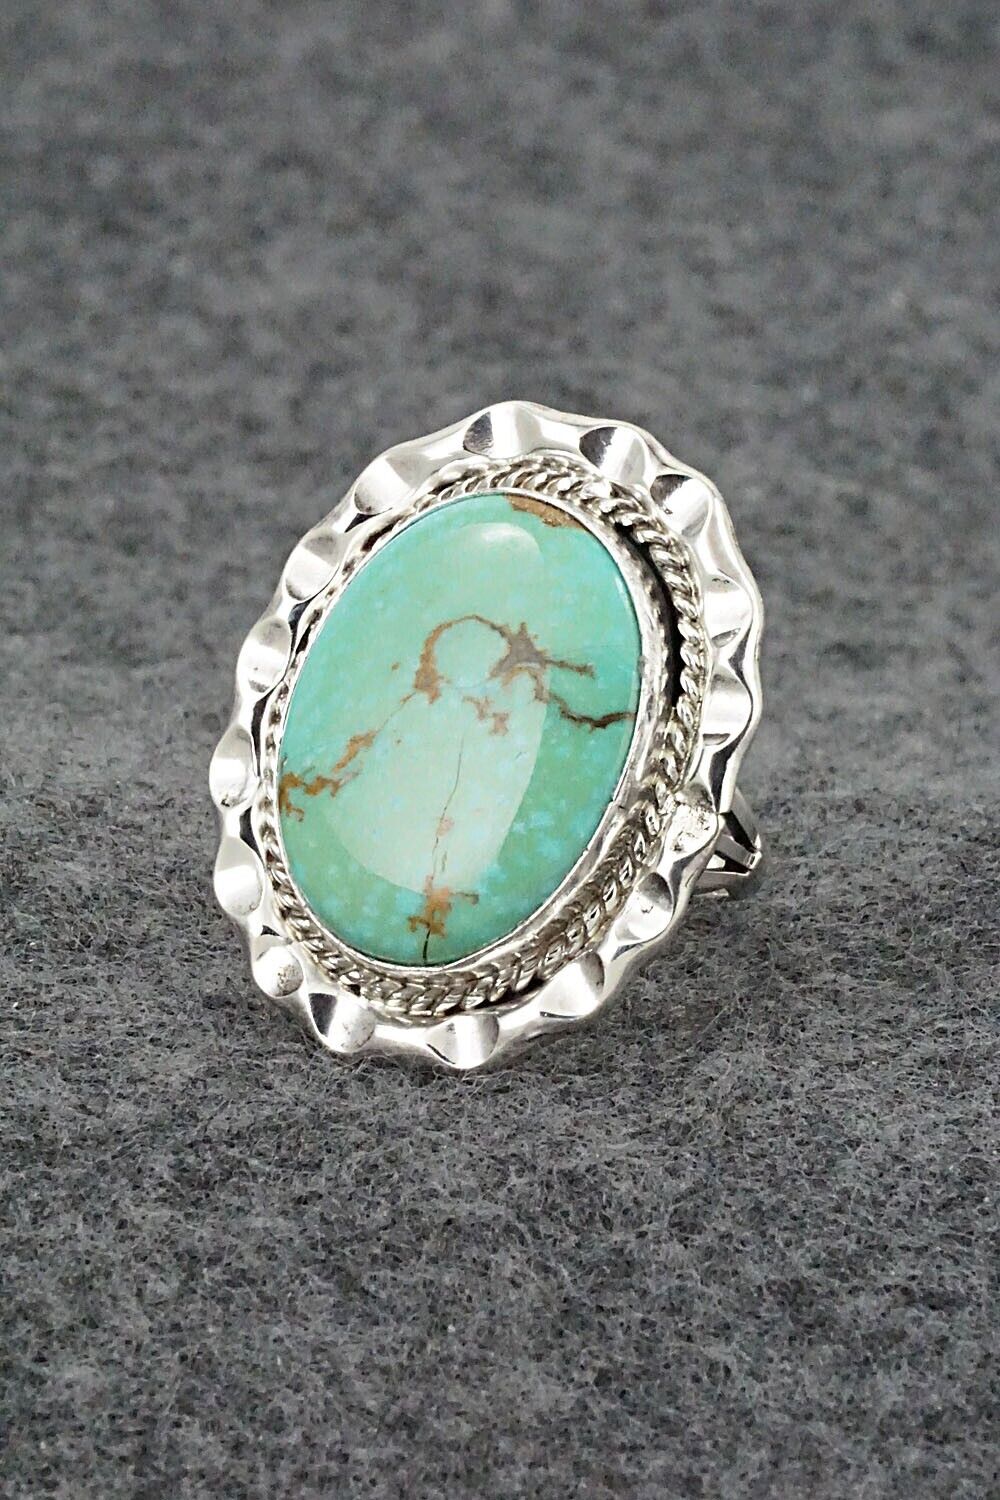 Turquoise & Sterling Silver Ring - Samuel Yellowhair - Size 8.5